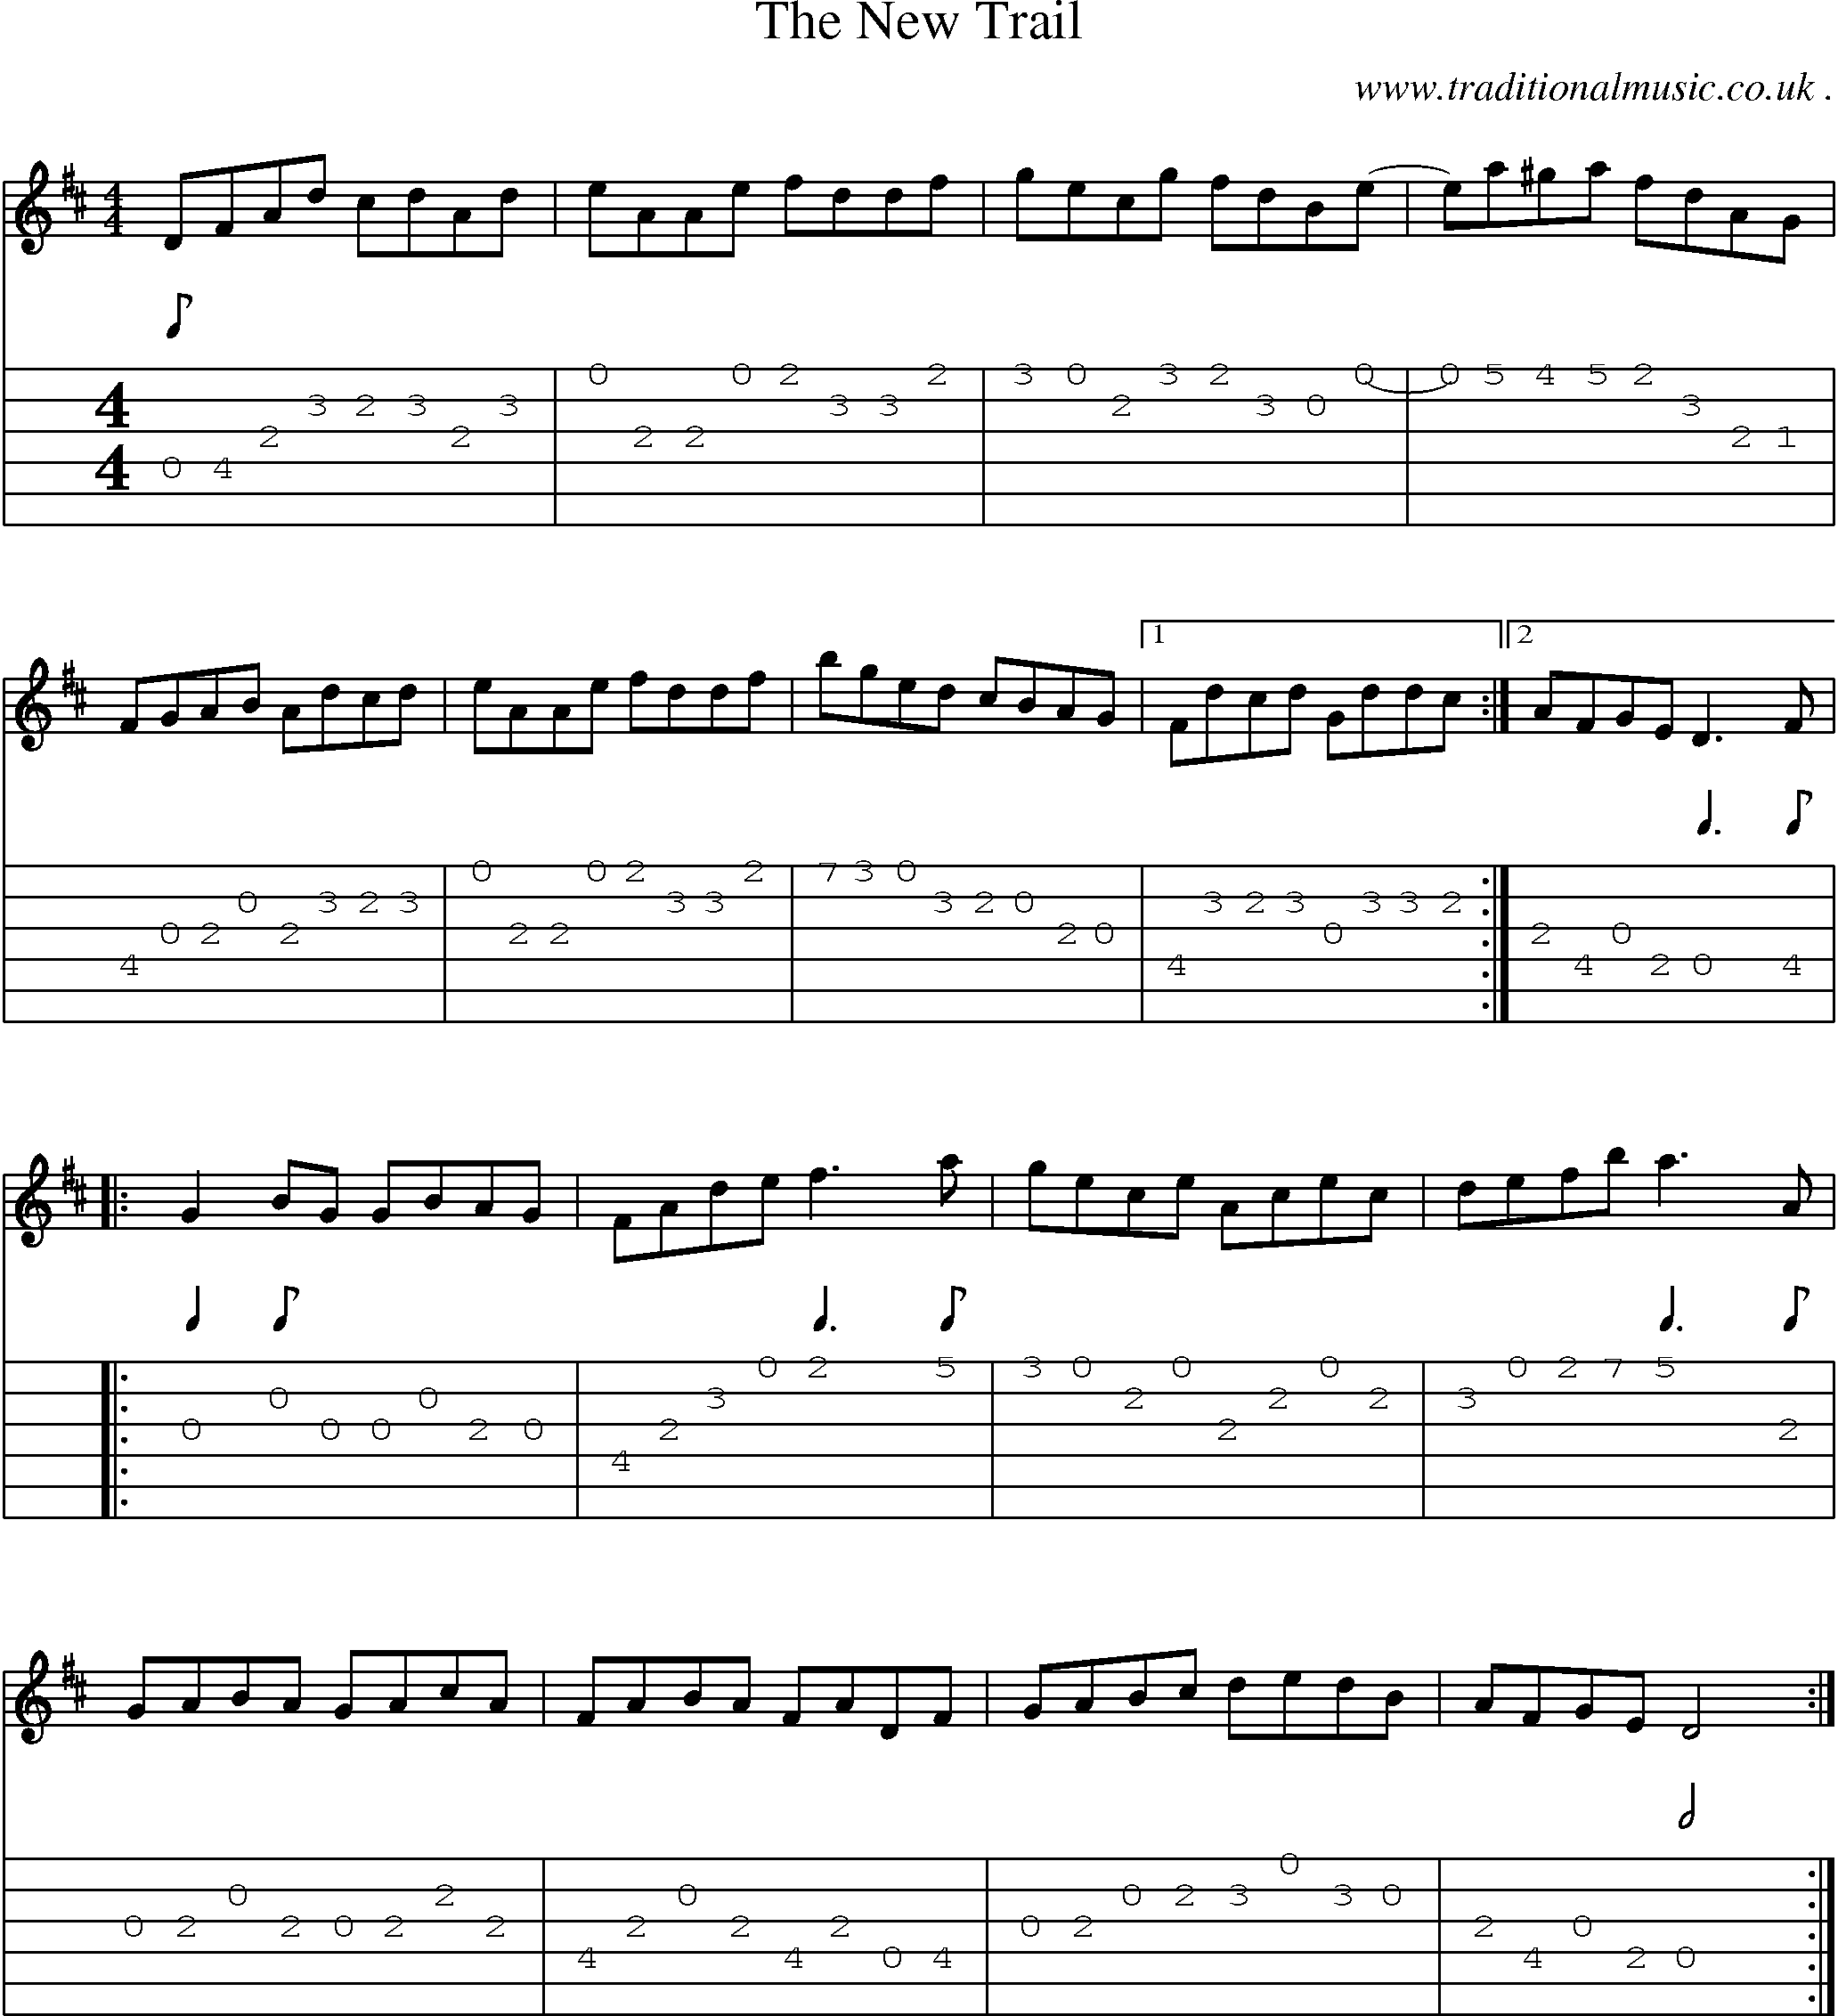 Sheet-Music and Guitar Tabs for The New Trail